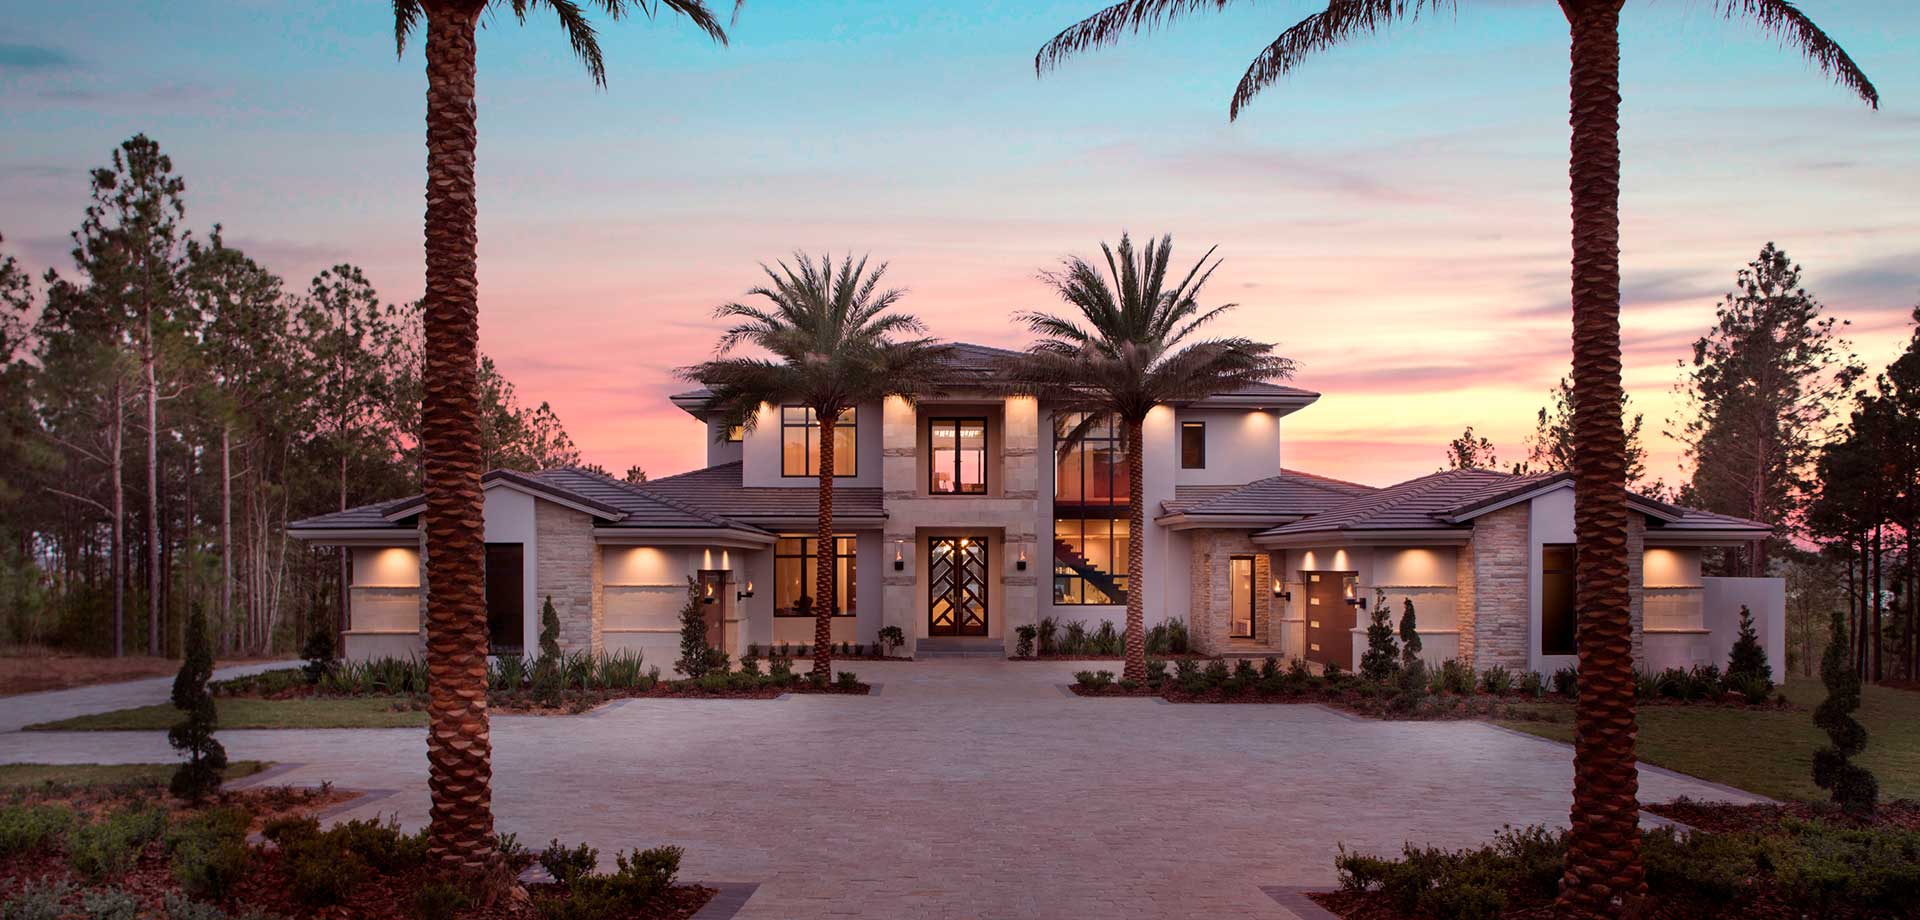 Exterior of modern tuscan style home in Orlando